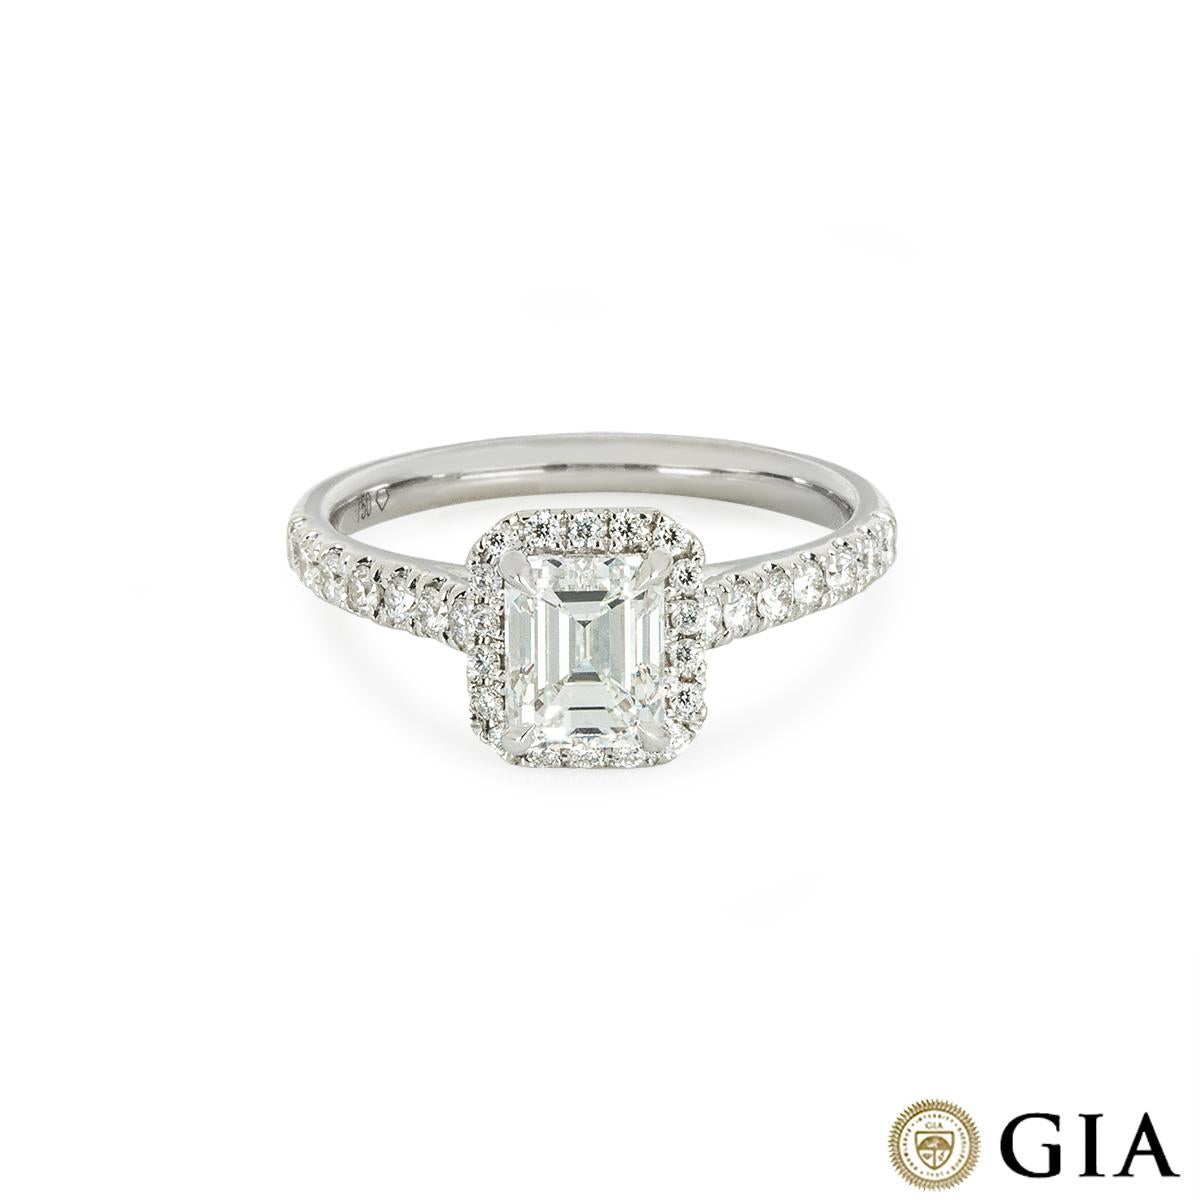 GIA Certified White Gold Emerald Cut Diamond Ring 1.08 Carat F/VS1 In New Condition For Sale In London, GB